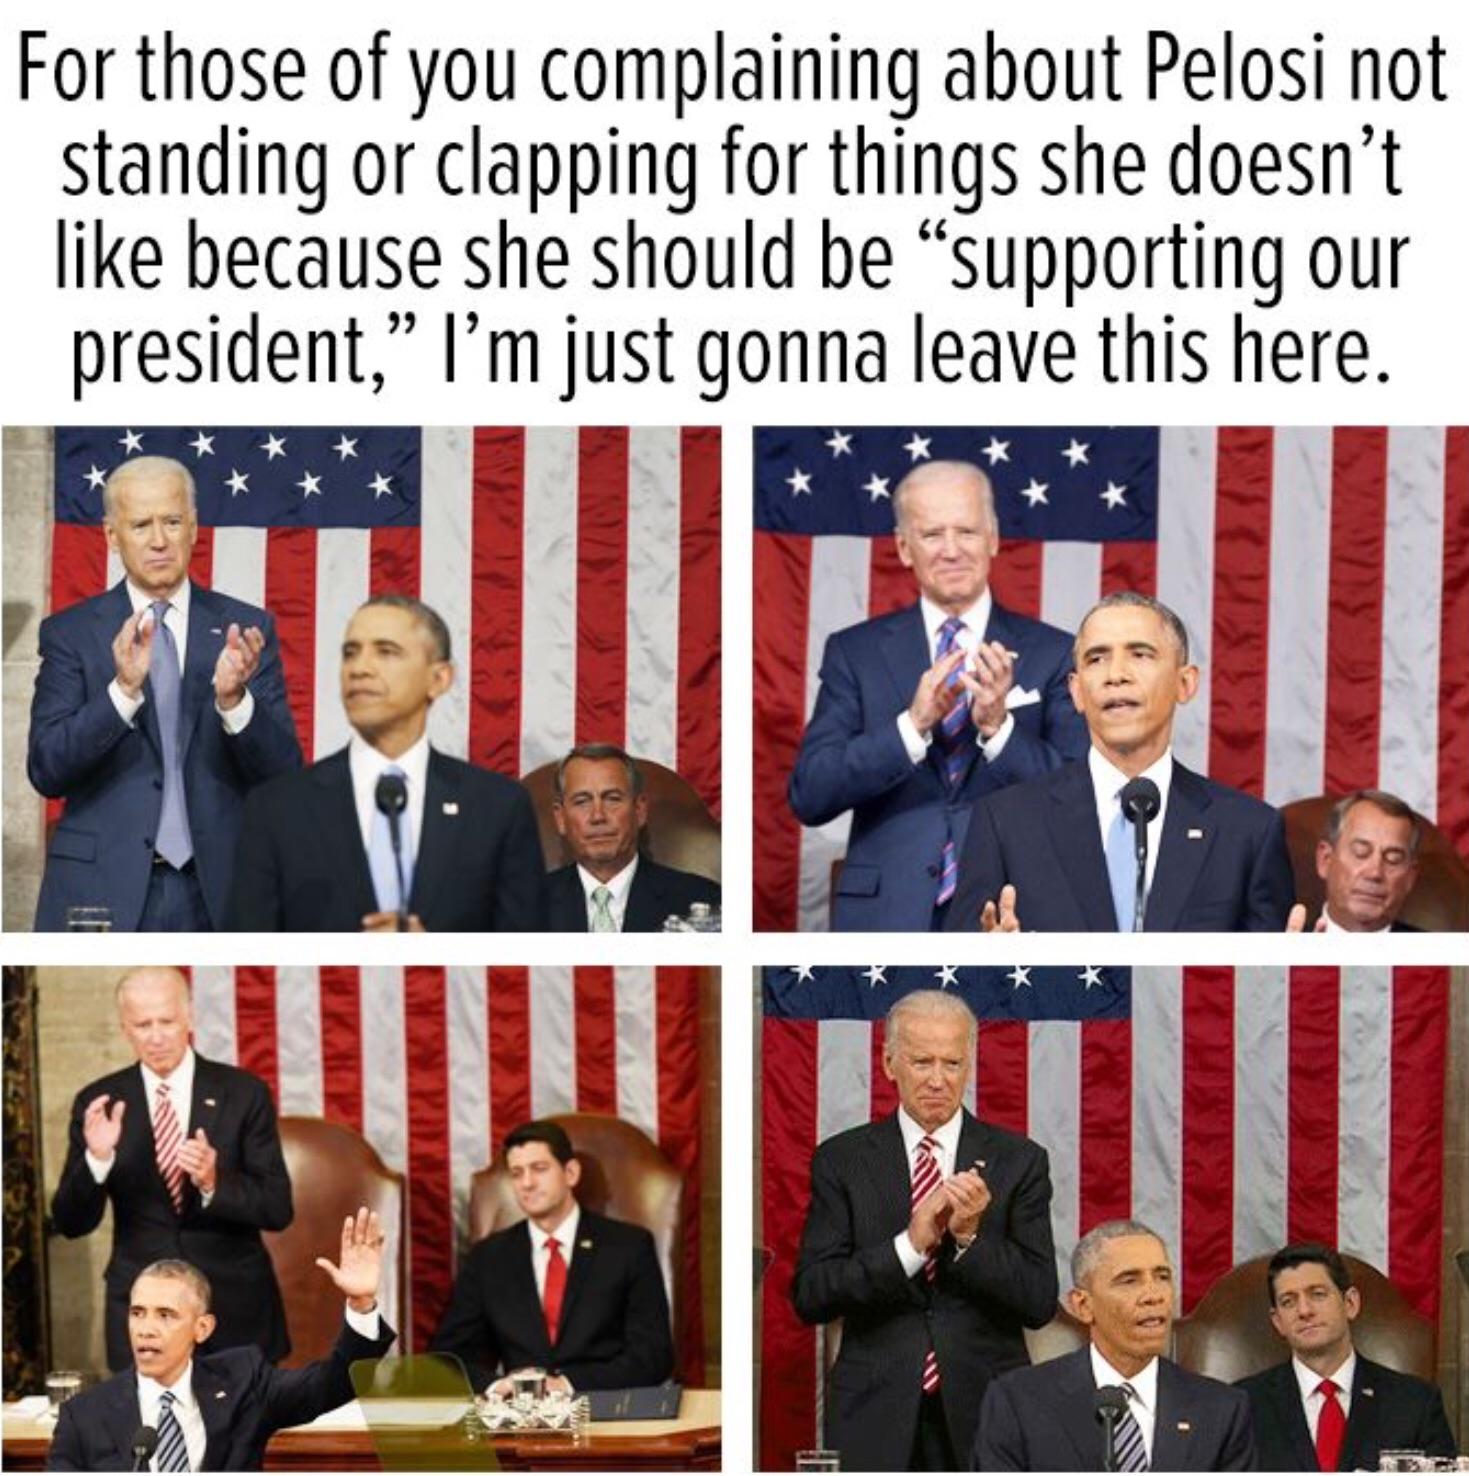 Political, Trump, Pelosi, Obama, Ryan, Republicans Political Memes Political, Trump, Pelosi, Obama, Ryan, Republicans text: For those of you complaining about Pelosi not standing or clapping for things she doesn't like because she should be 